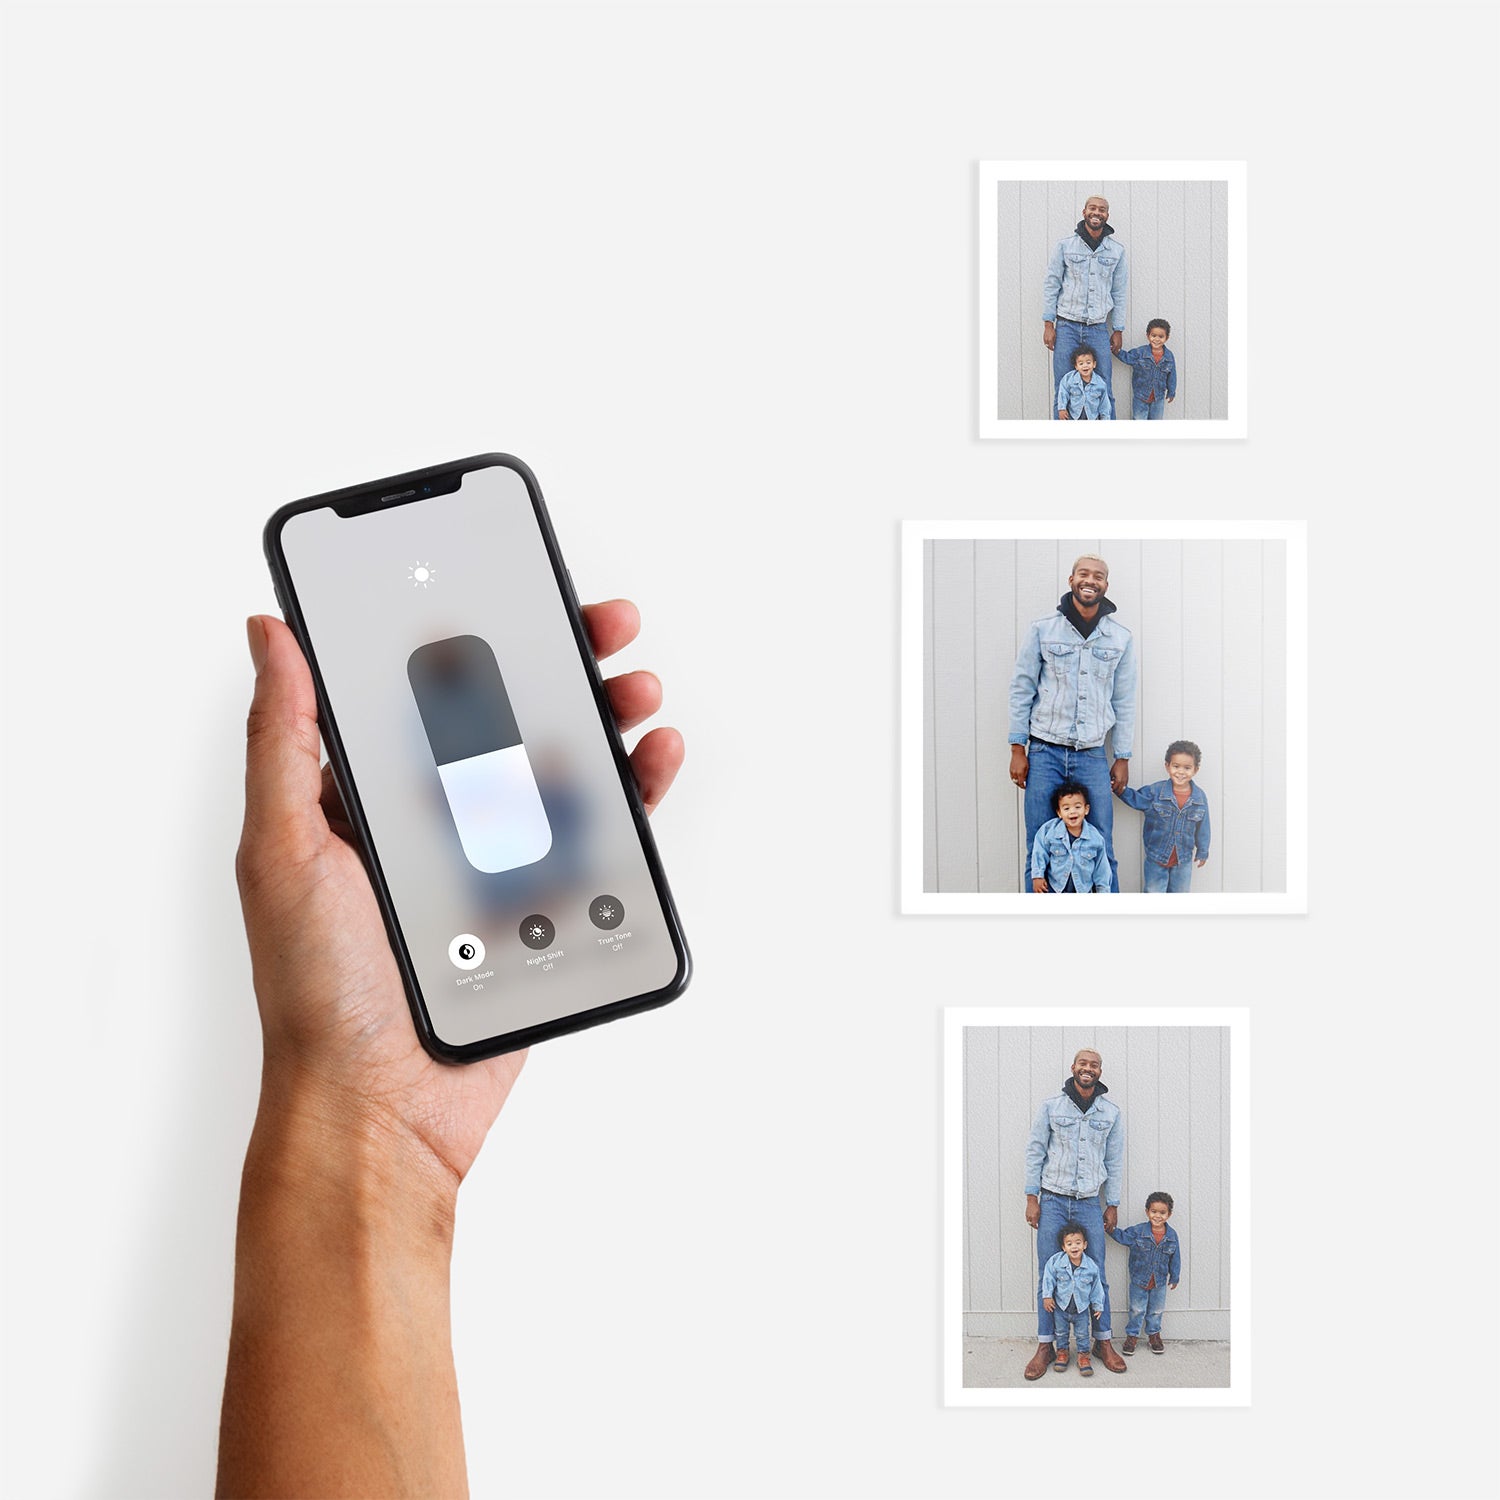 Hand adjusting screen brightness on an iphone next to three Artifact Uprising photo prints featuring family photos of a father and their children